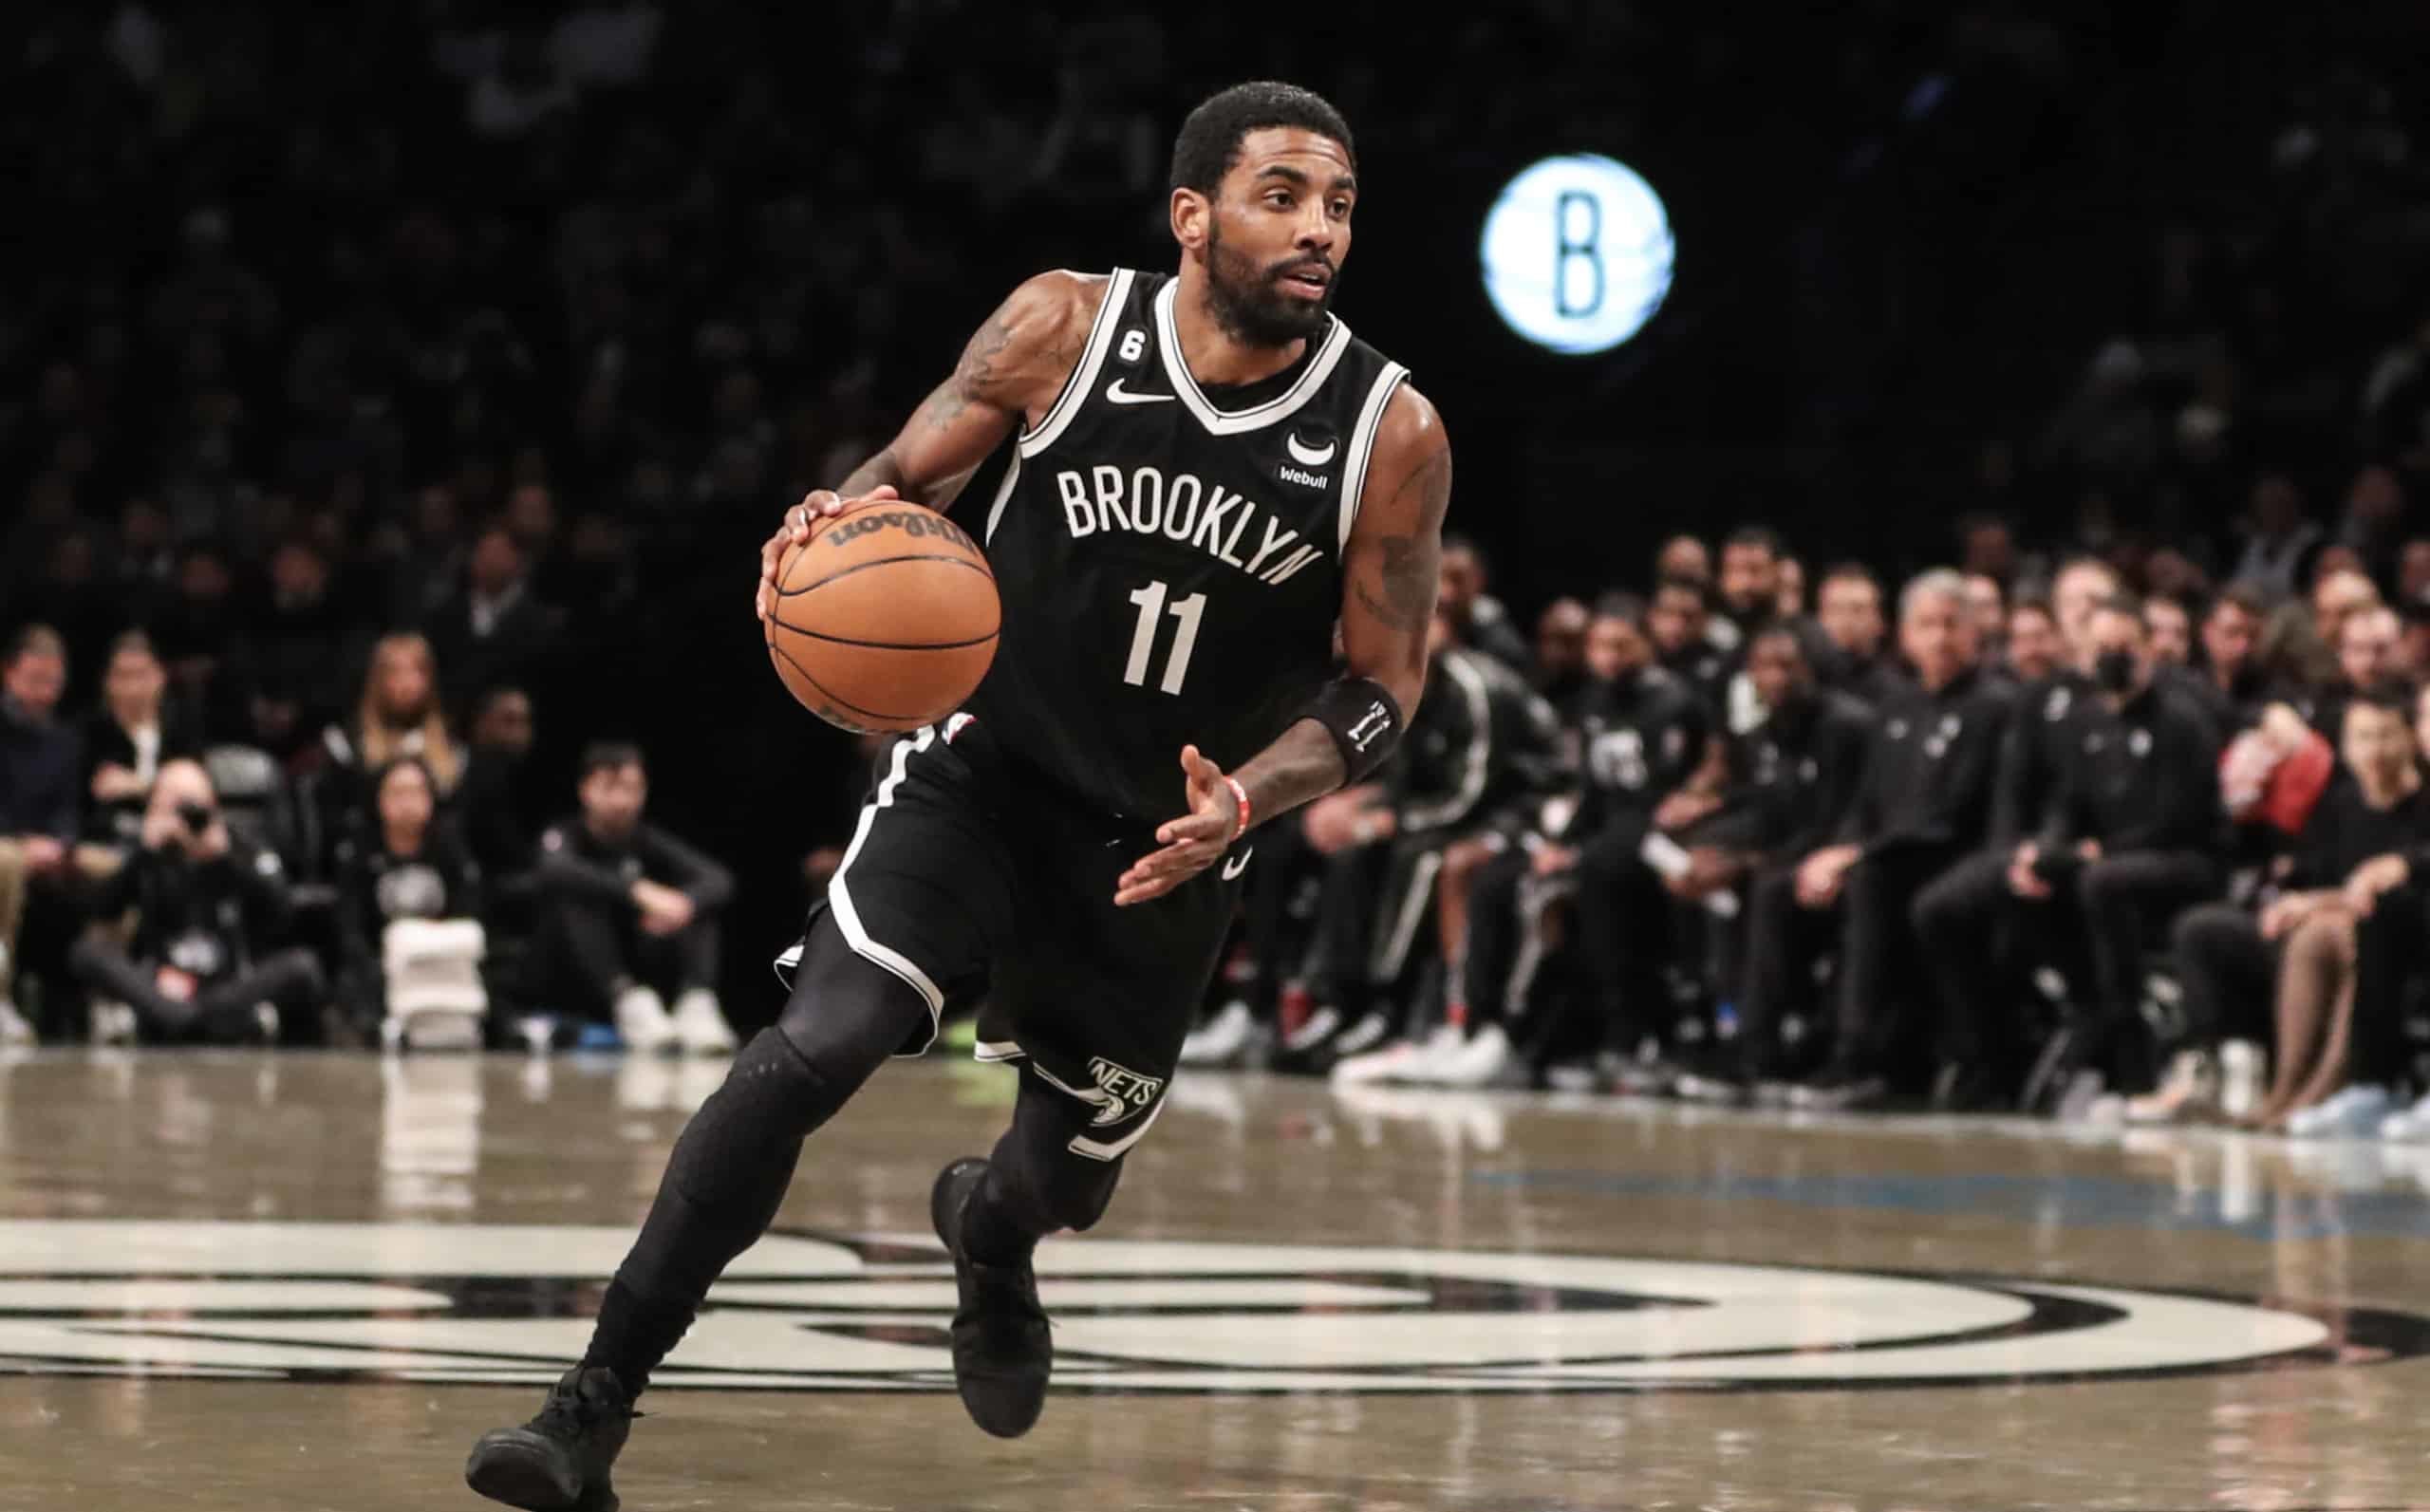 Kyrie Irving drives to basket while wearing all-black basketball shoes